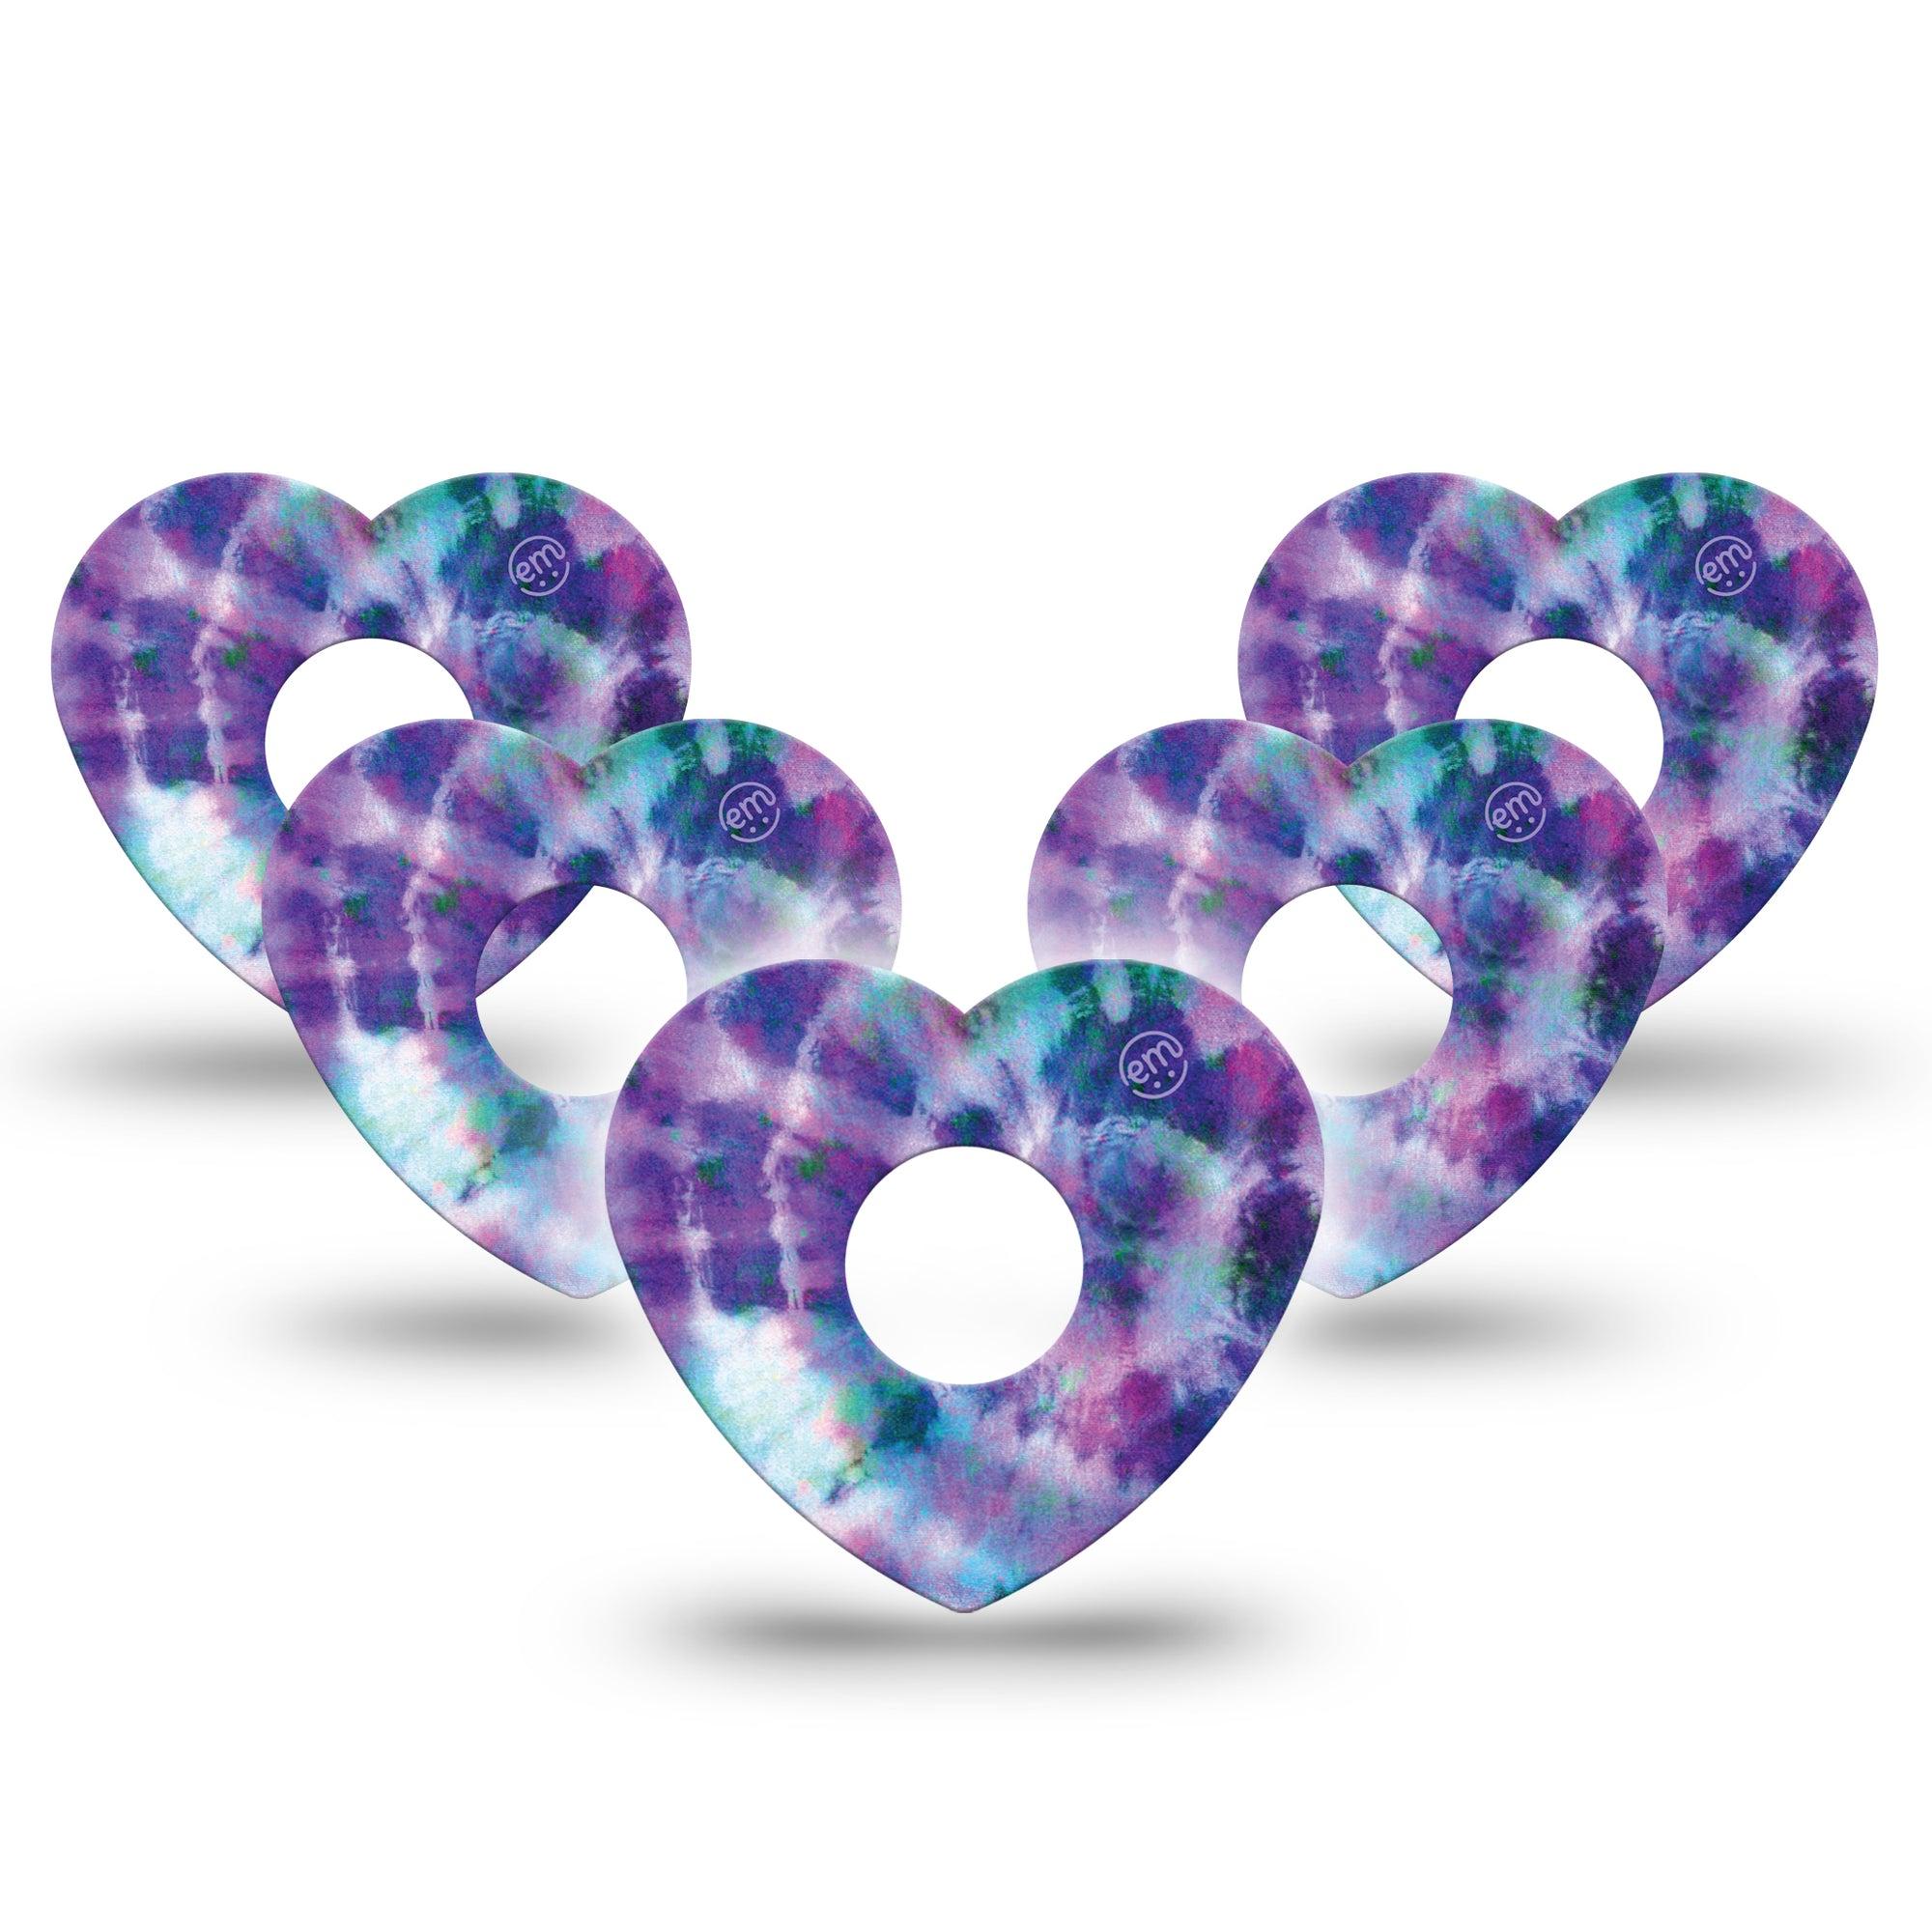 ExpressionMed Purple Tie Dye Heart Libre 3 Tape, 5-Pack, Tie Dye Pattern Themed, CGM Adhesive Patch Design